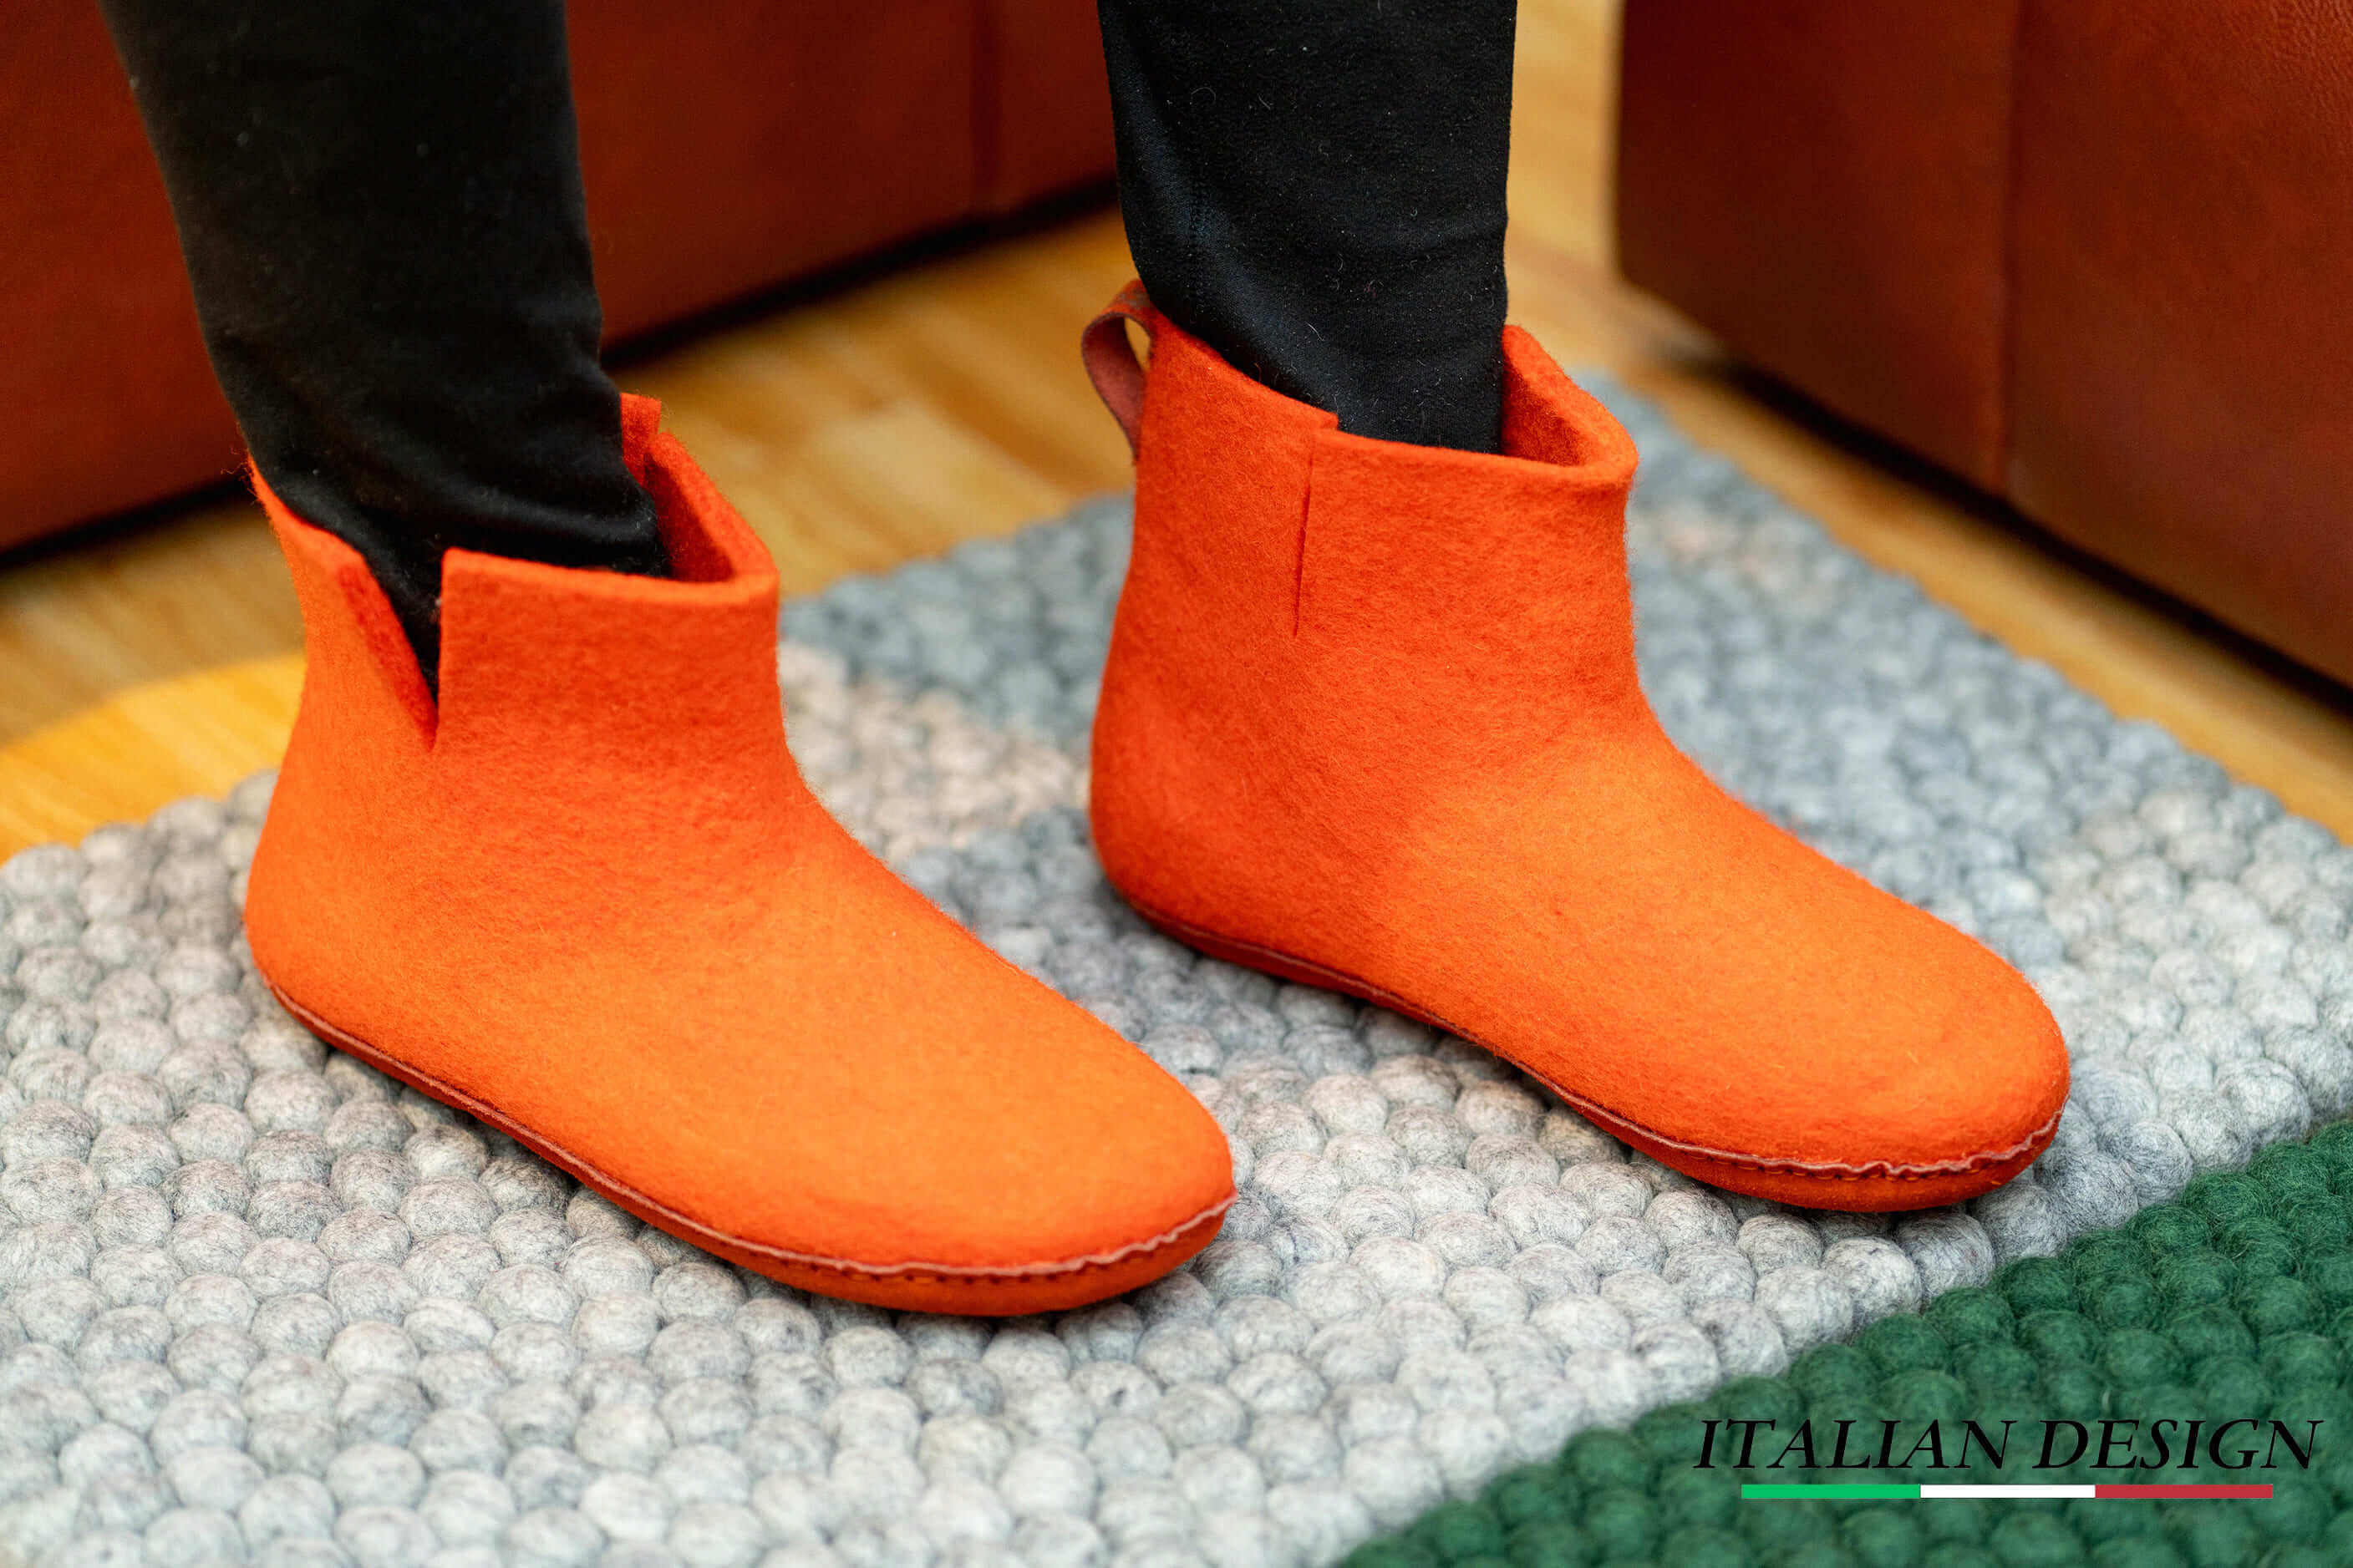 Indoor Boots With Leather Sole - Orange